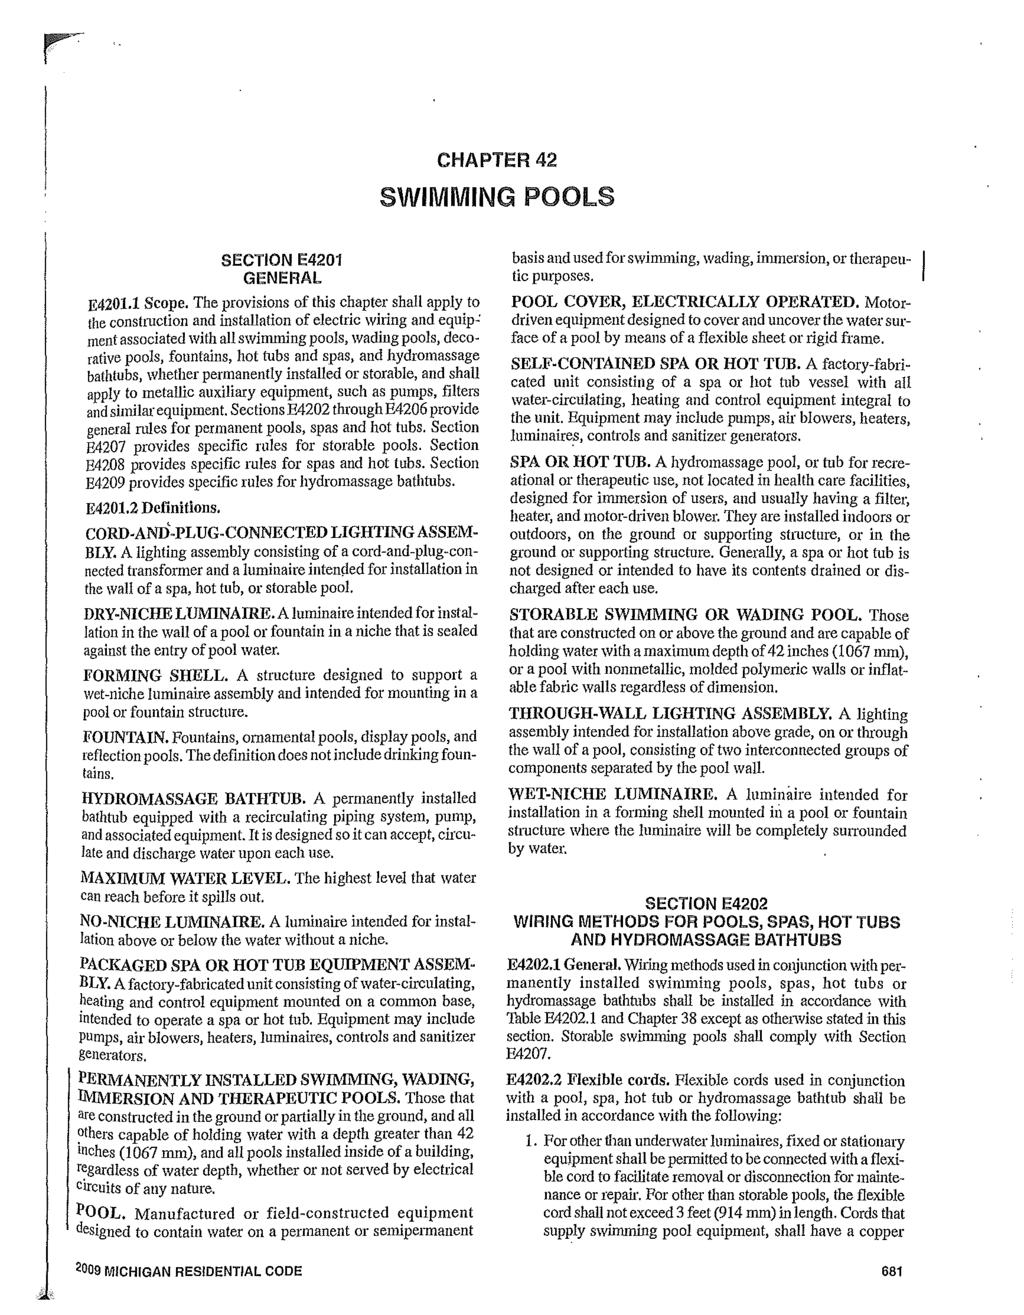 r CHAPTER 42 SWIMMING POOLS SECTION E4201 GENERAL E4201.1 Scope.